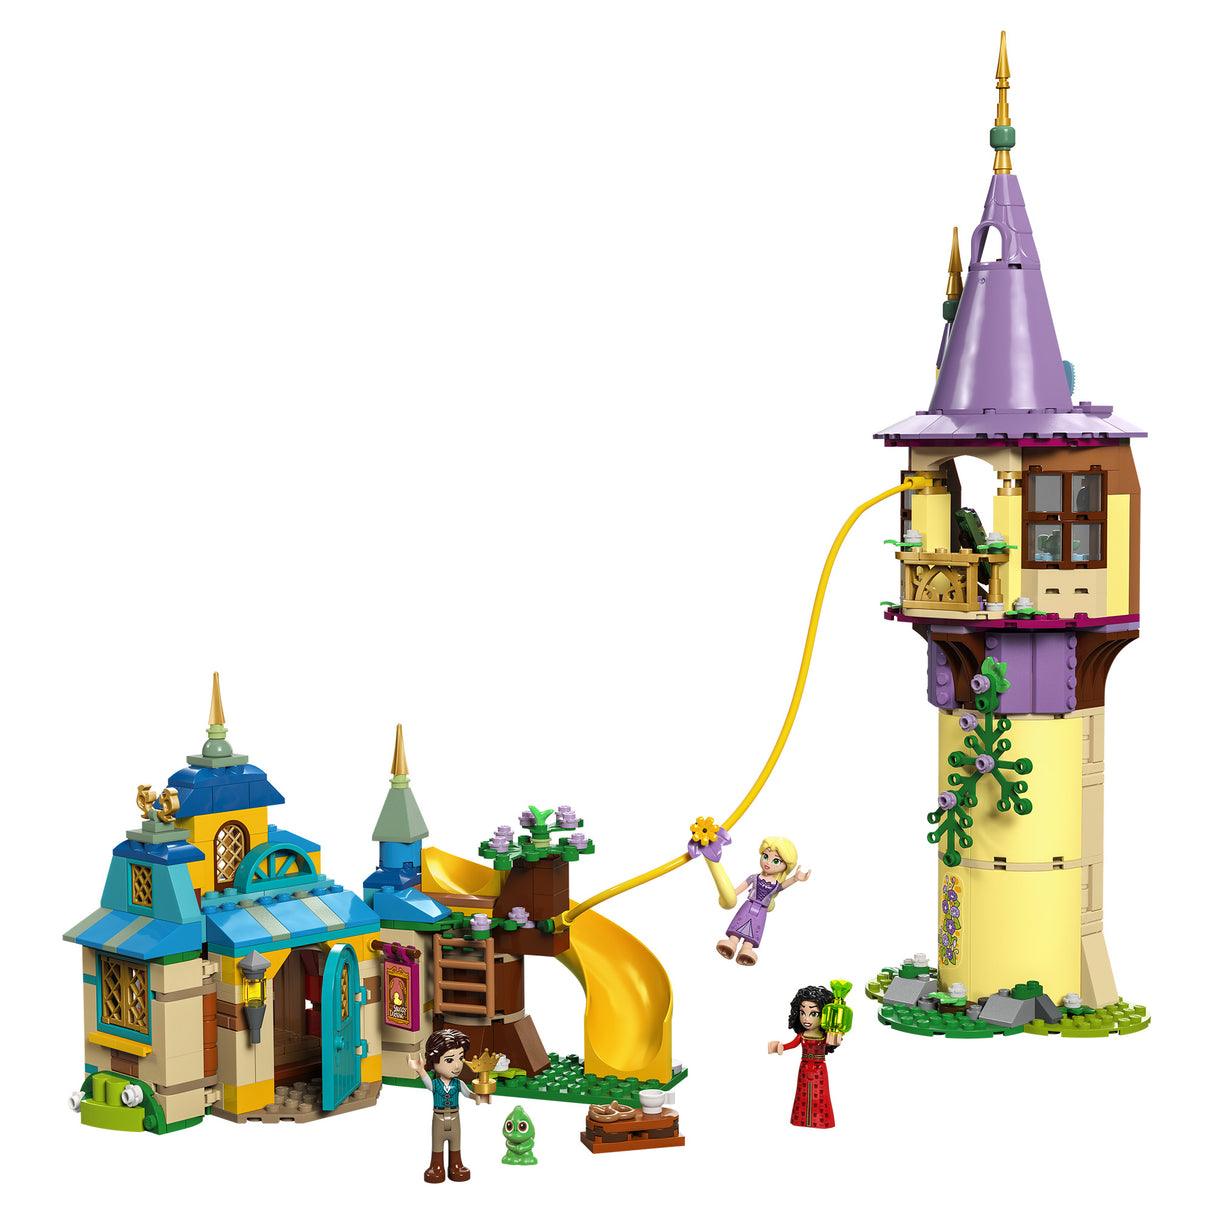 LEGO Disney Princess Rapunzel's Tower & The Snuggly Duckling 43241, (623-pieces)